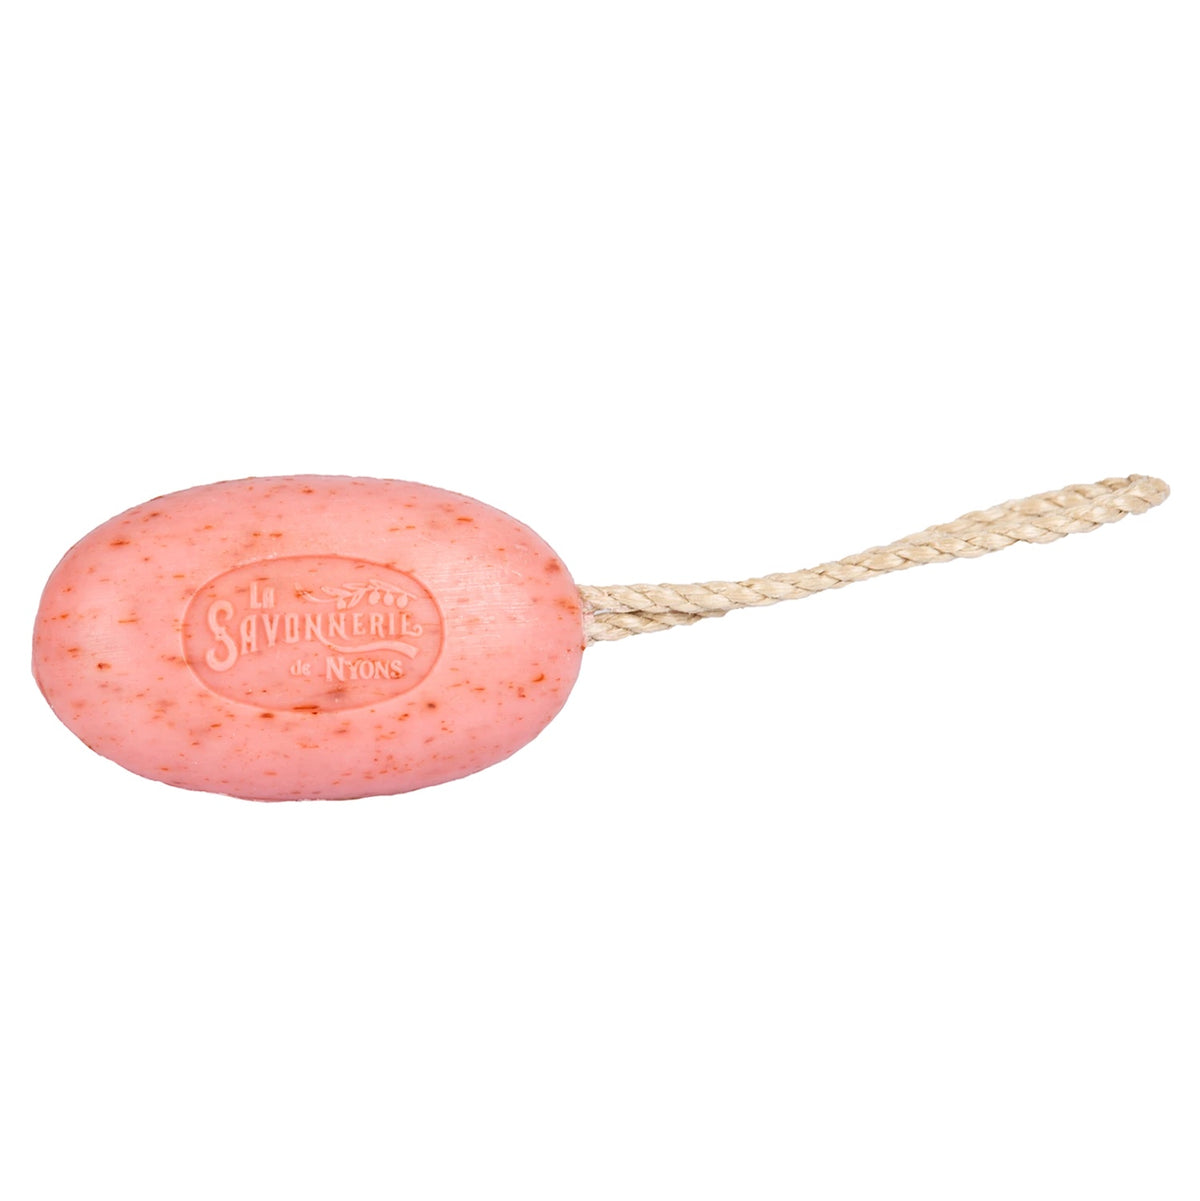 La Savonnerie de Nyons Exfoliating Rose with Rope